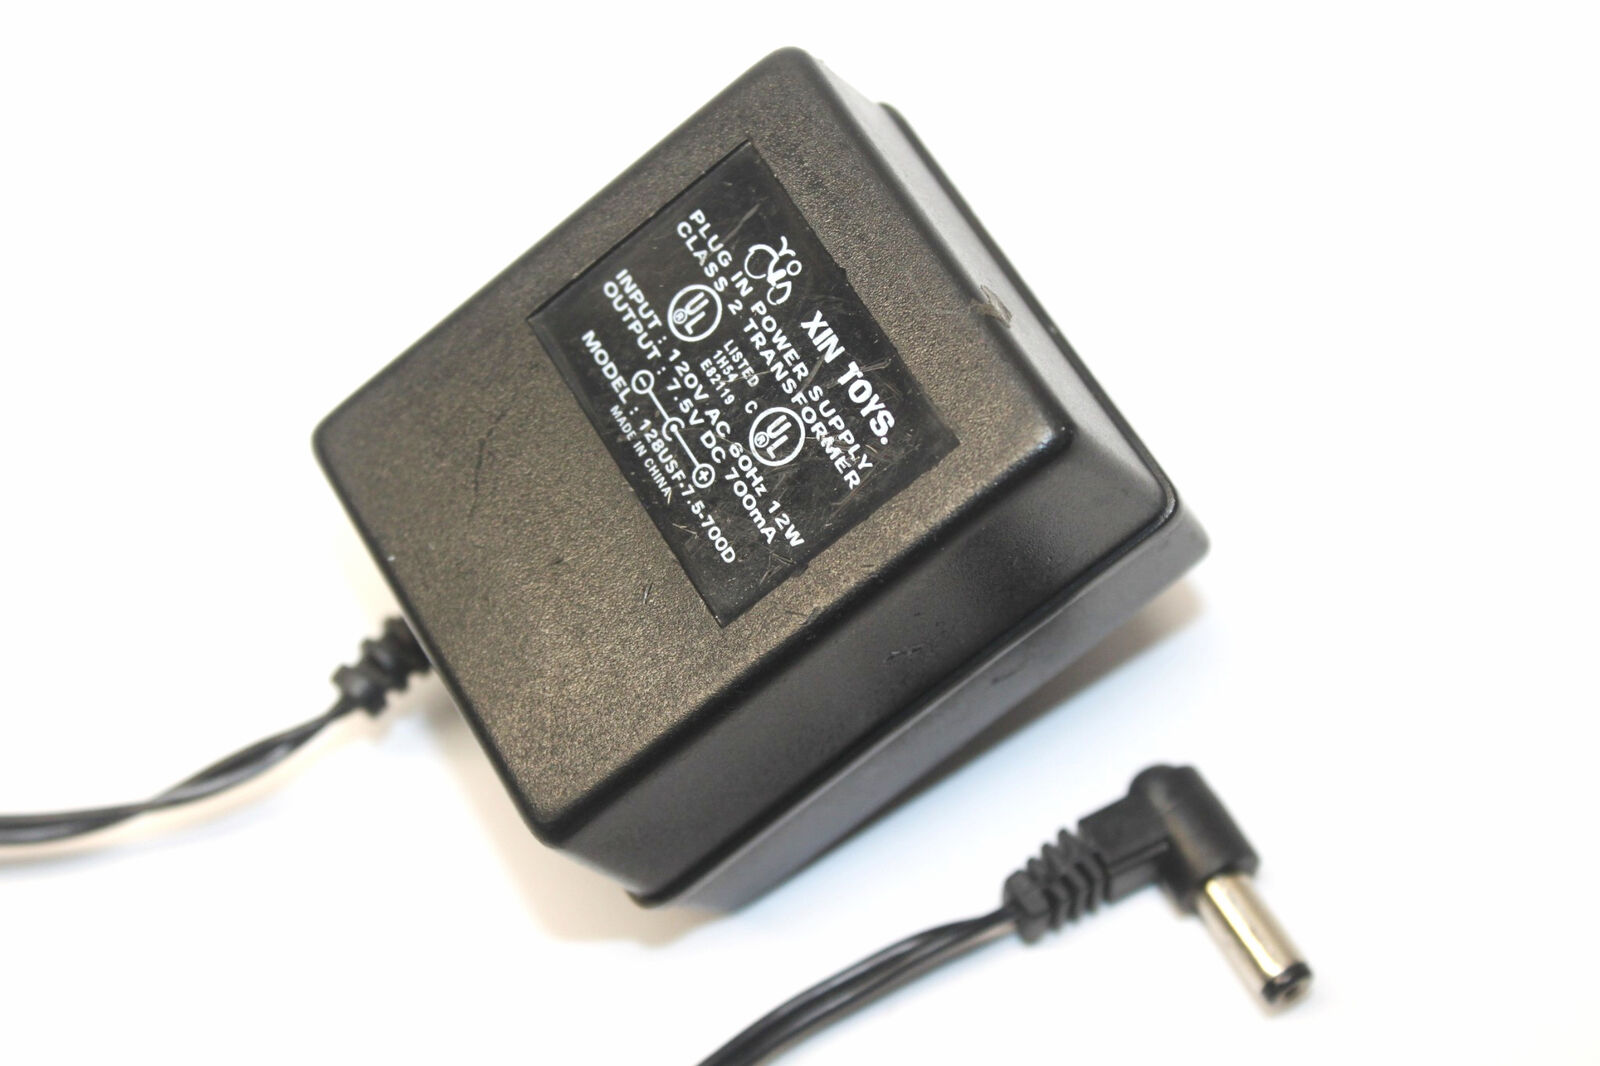 Xin Toys 128USF-7.5-700D Plug-In Class 2 Transformer AC Adapter DC 7.5V 700mA Brand: Xin Toys Type: Adapter MPN: